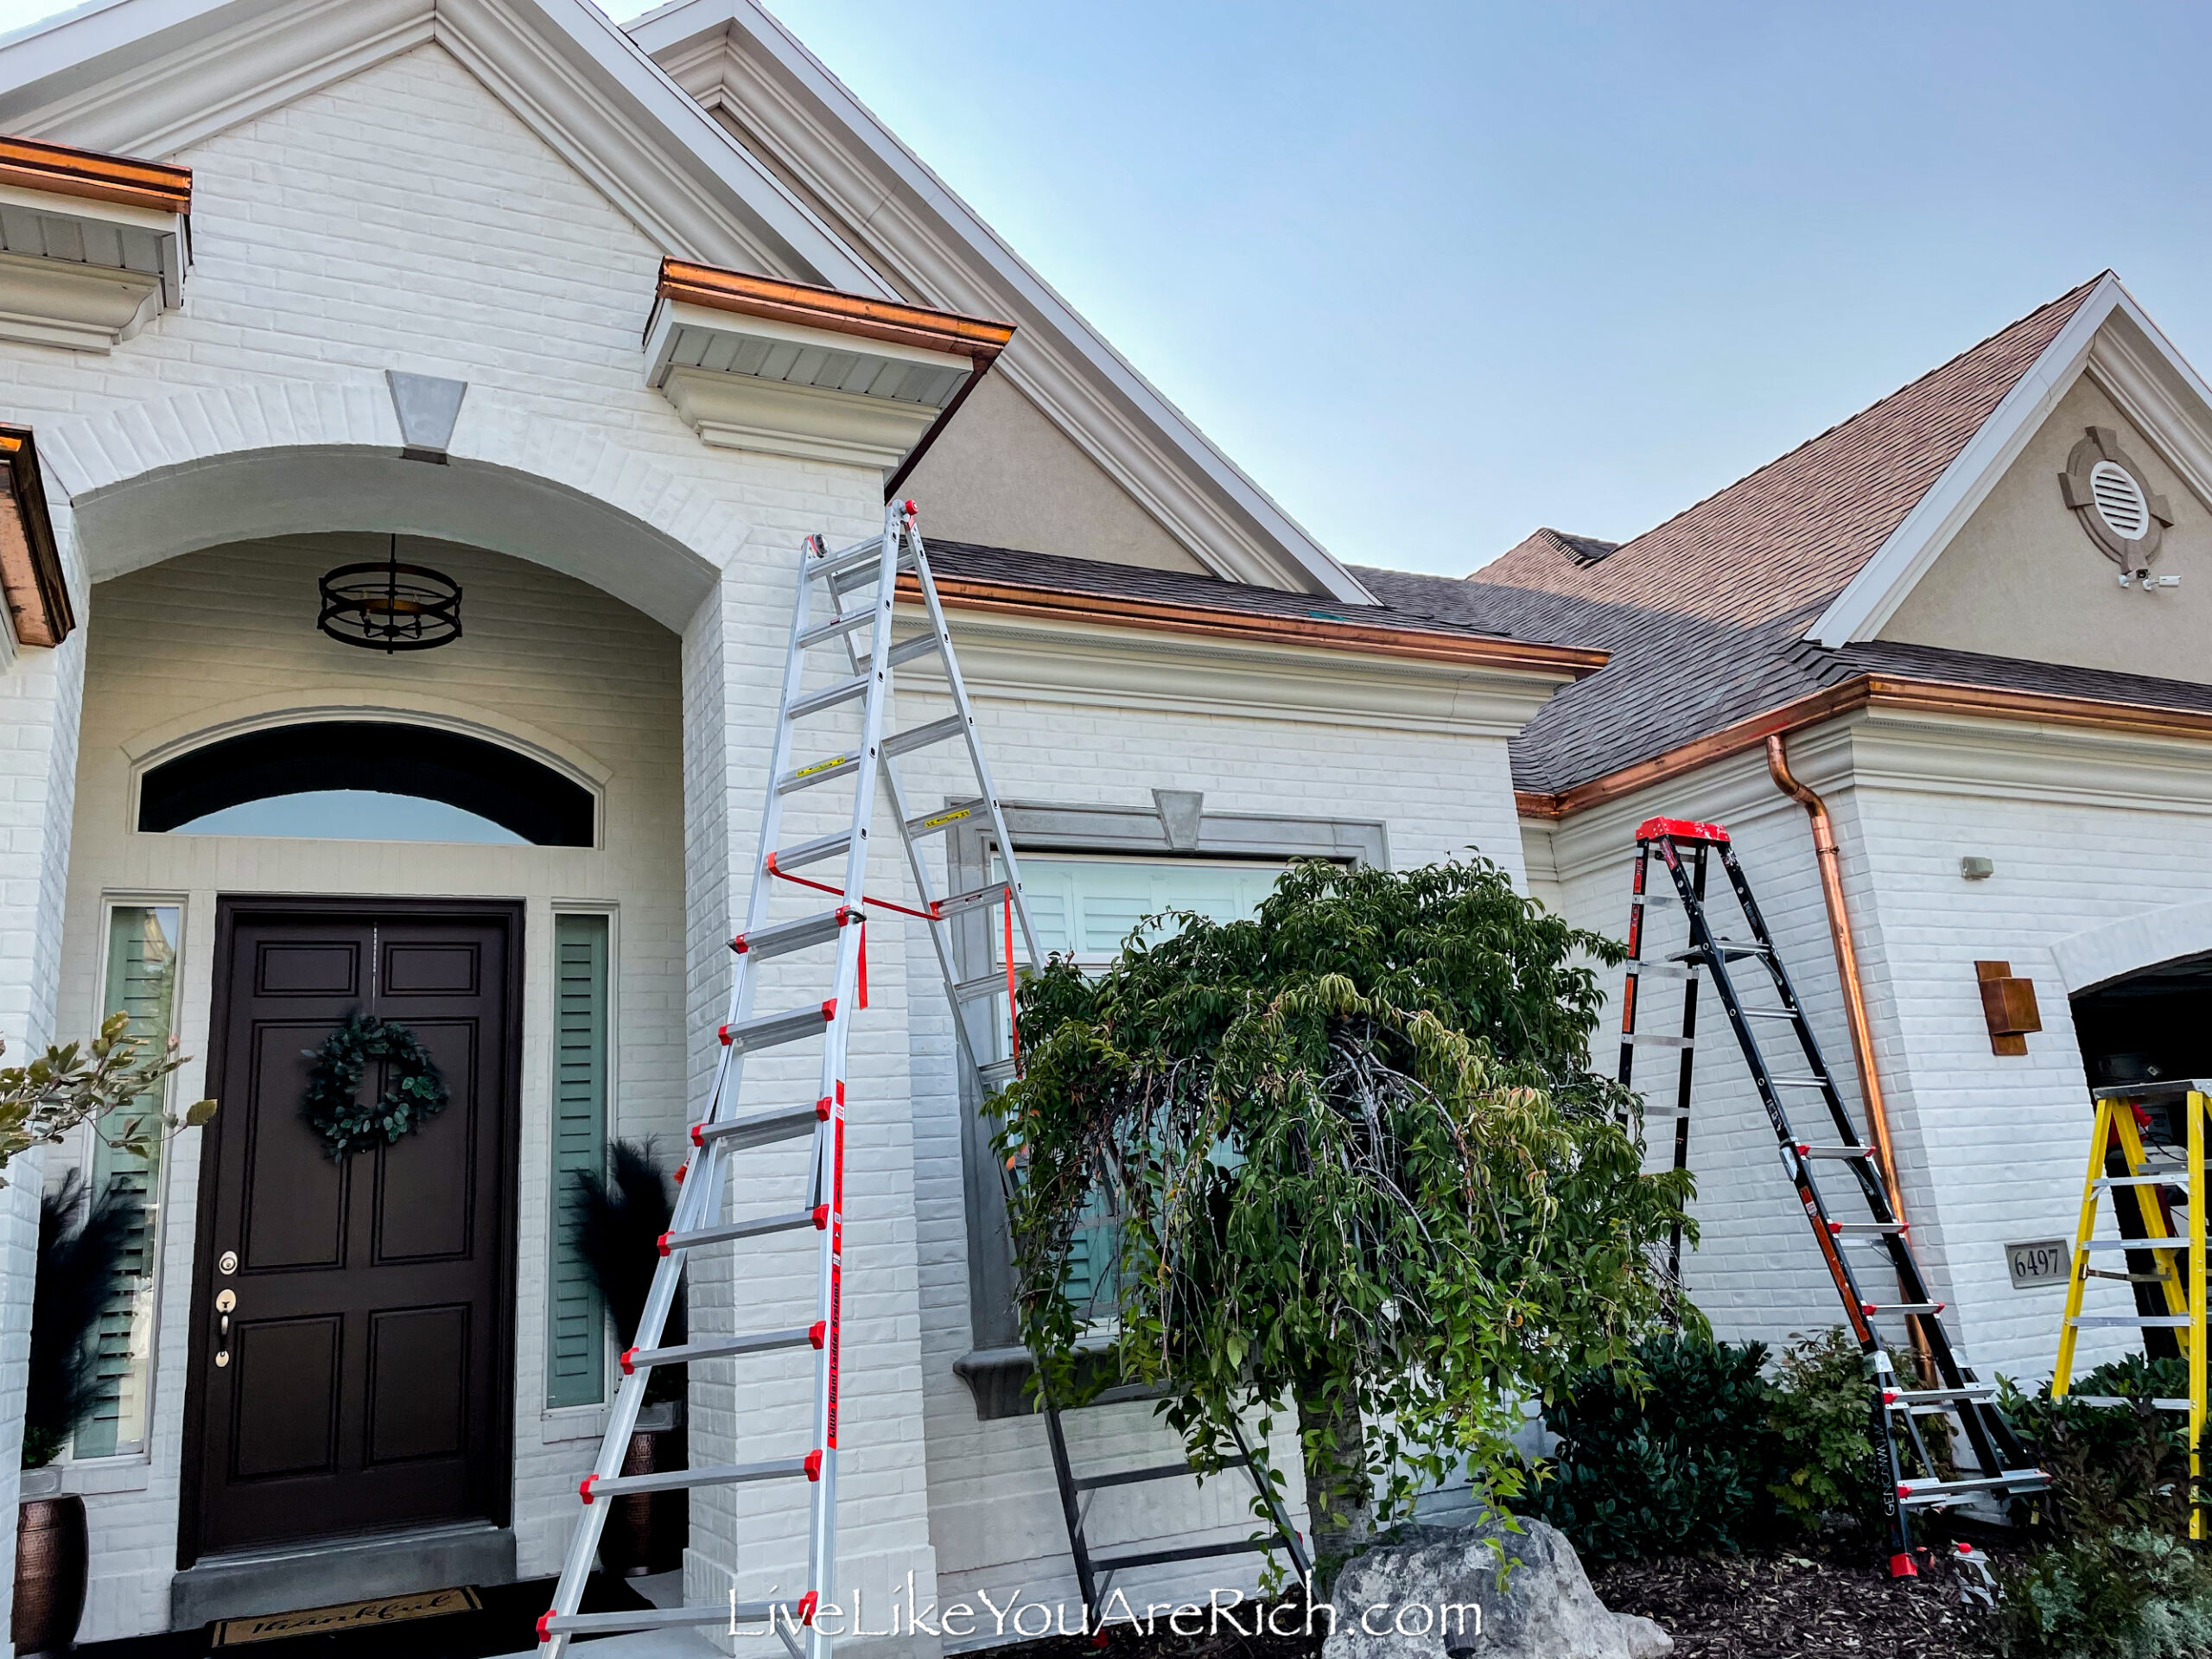 How to Seal Copper Gutters to Keep Them From Turning Brown